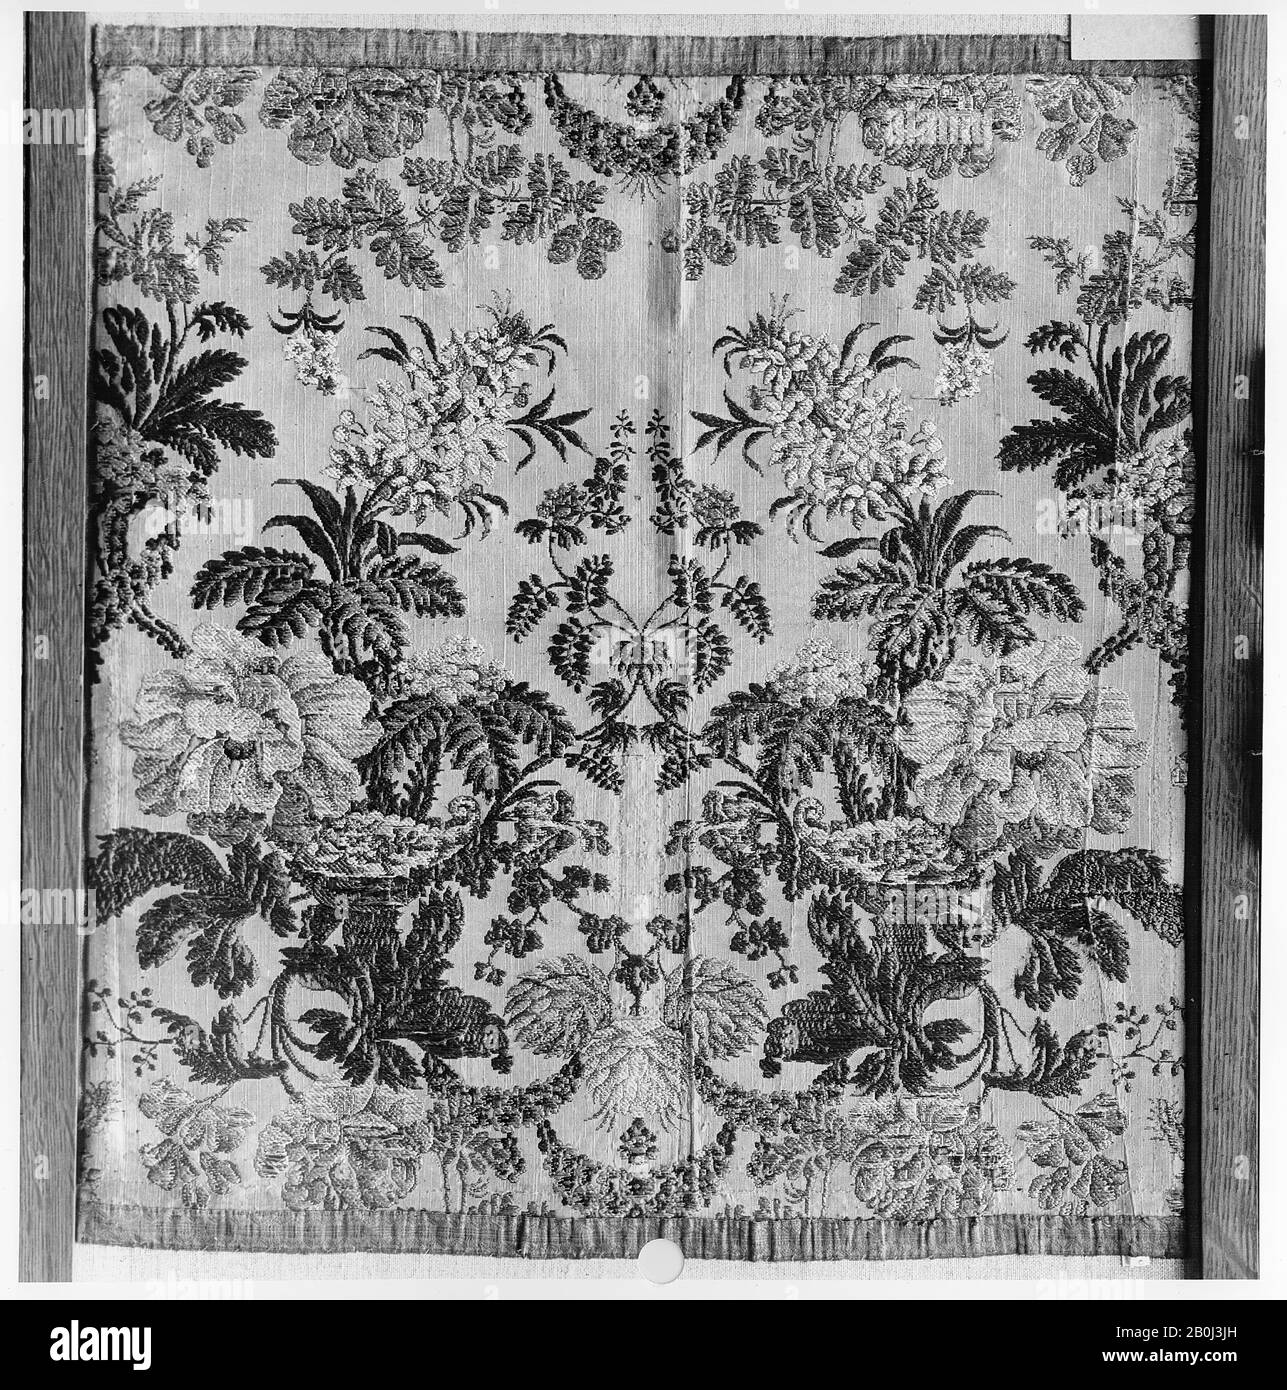 Piece, French, ca. 1730, French, Silk, Overall: 6 x 6 7/8 in. (15.2 x 17.5 cm), Textiles-Woven Stock Photo